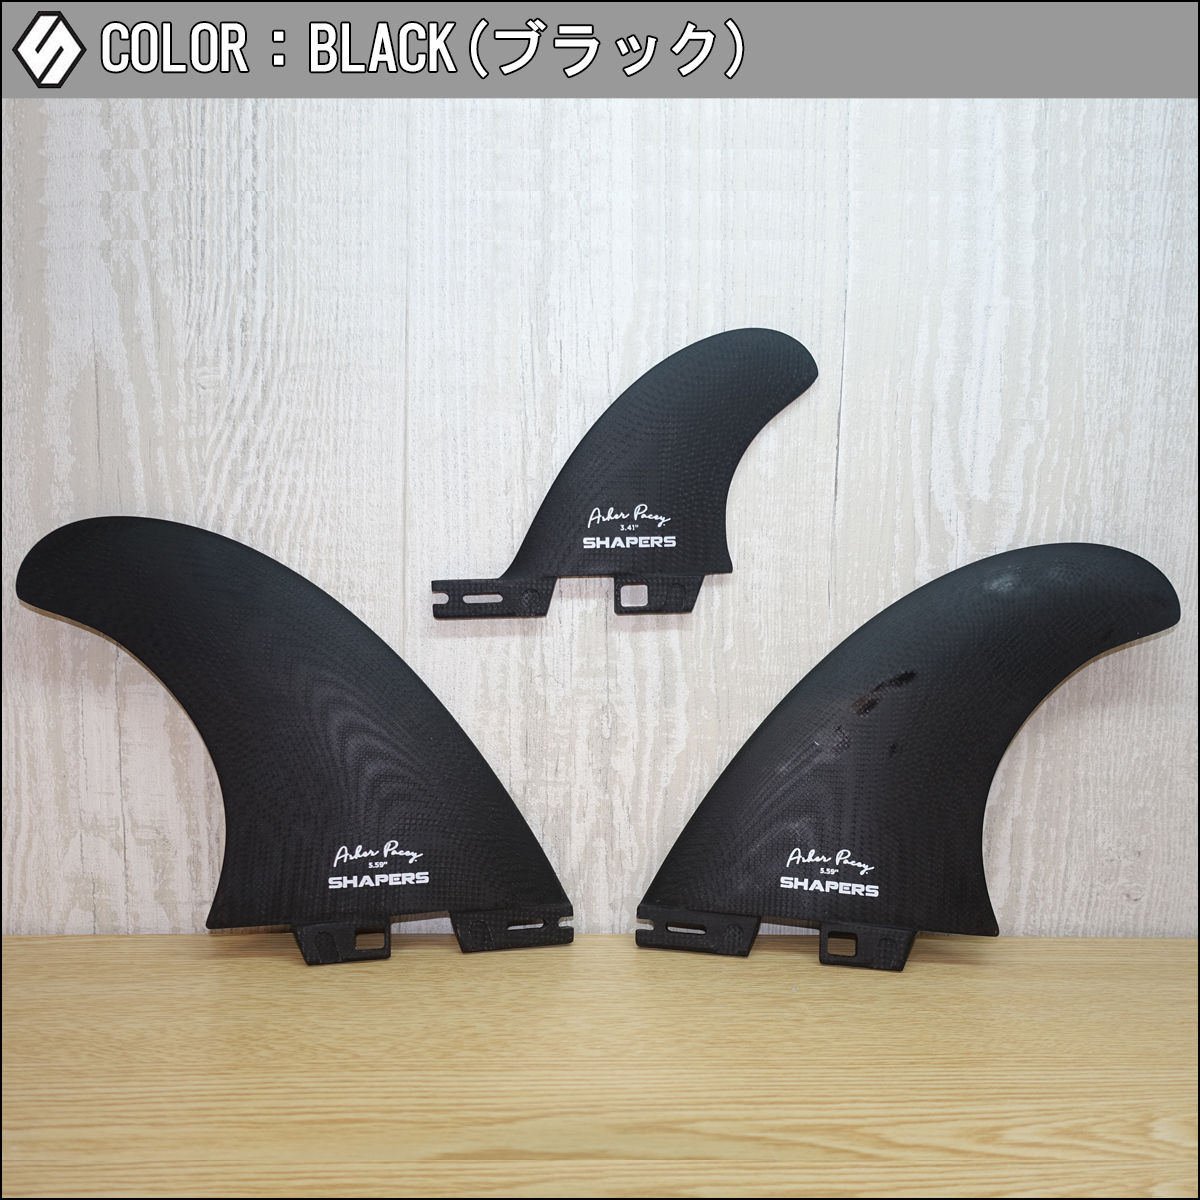 SHAPERS FINS シェイパーズ フィン Asher Pacey 5.59 2＋1FIN アッシャーペイシー 2＋1フィン FCS2 ツイン  スタビライザー 3本セット サーフィン 日本正規品